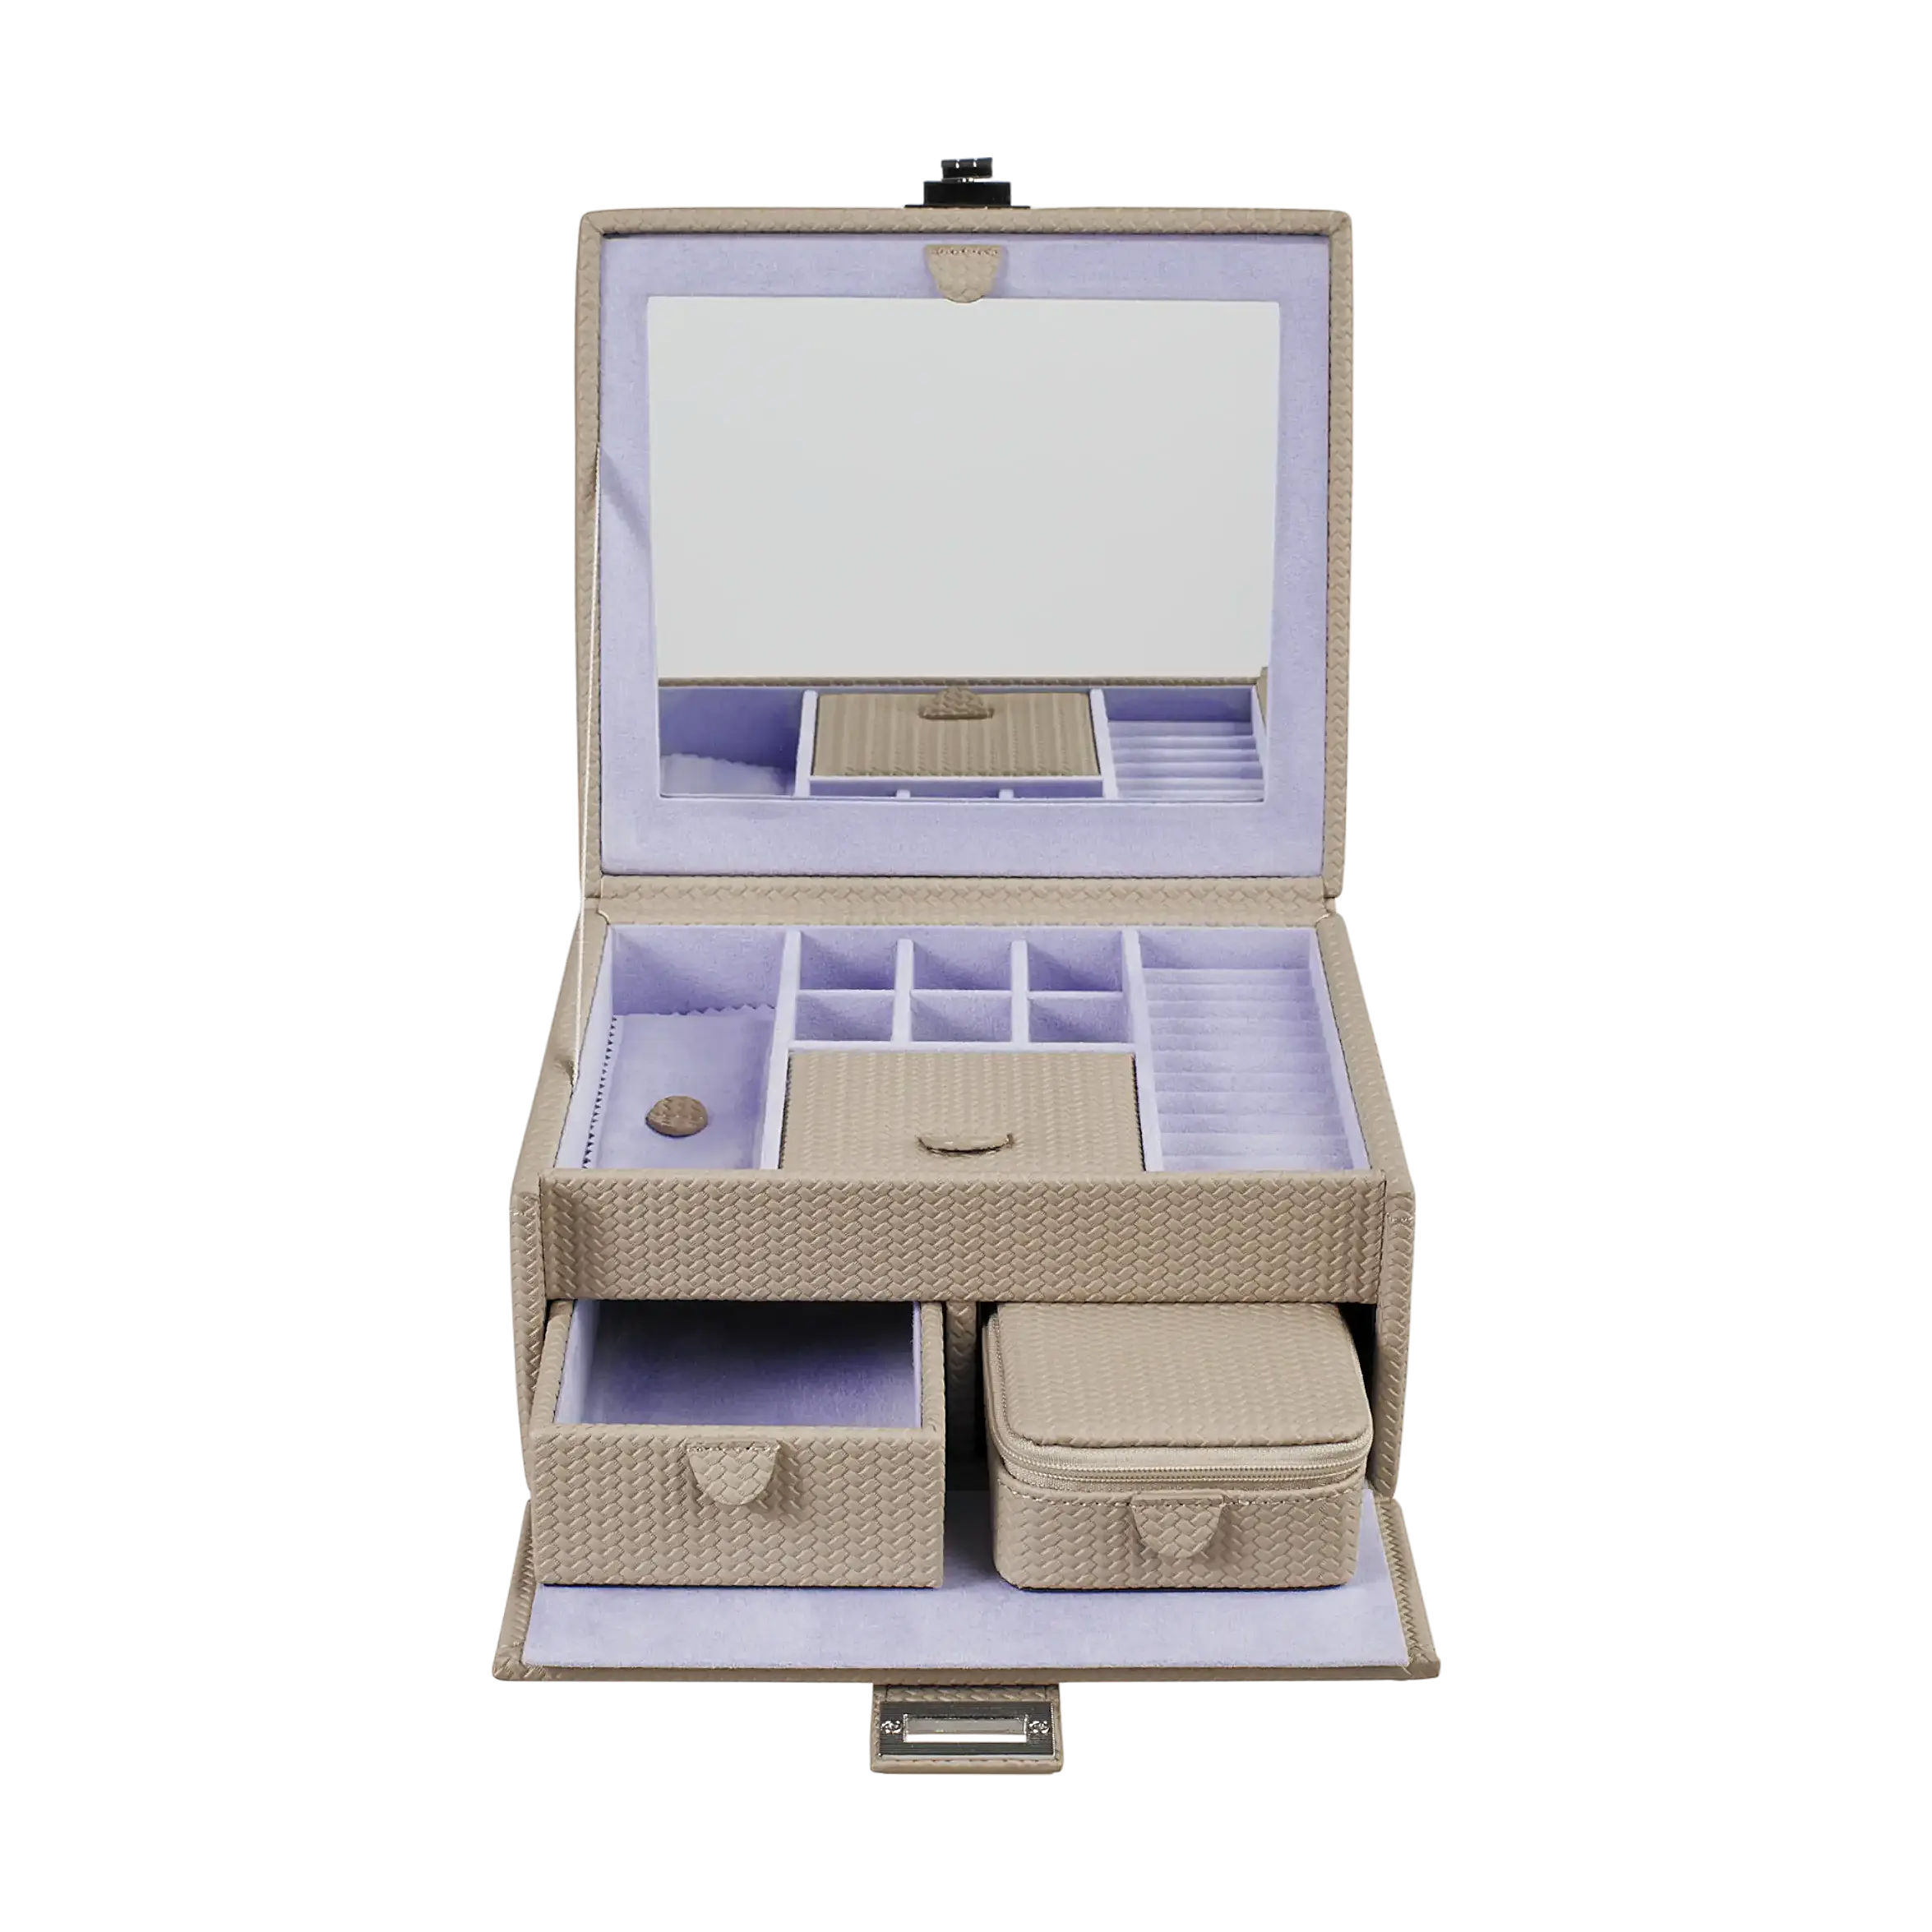 Jewellery case M with insert Corbello / taupe